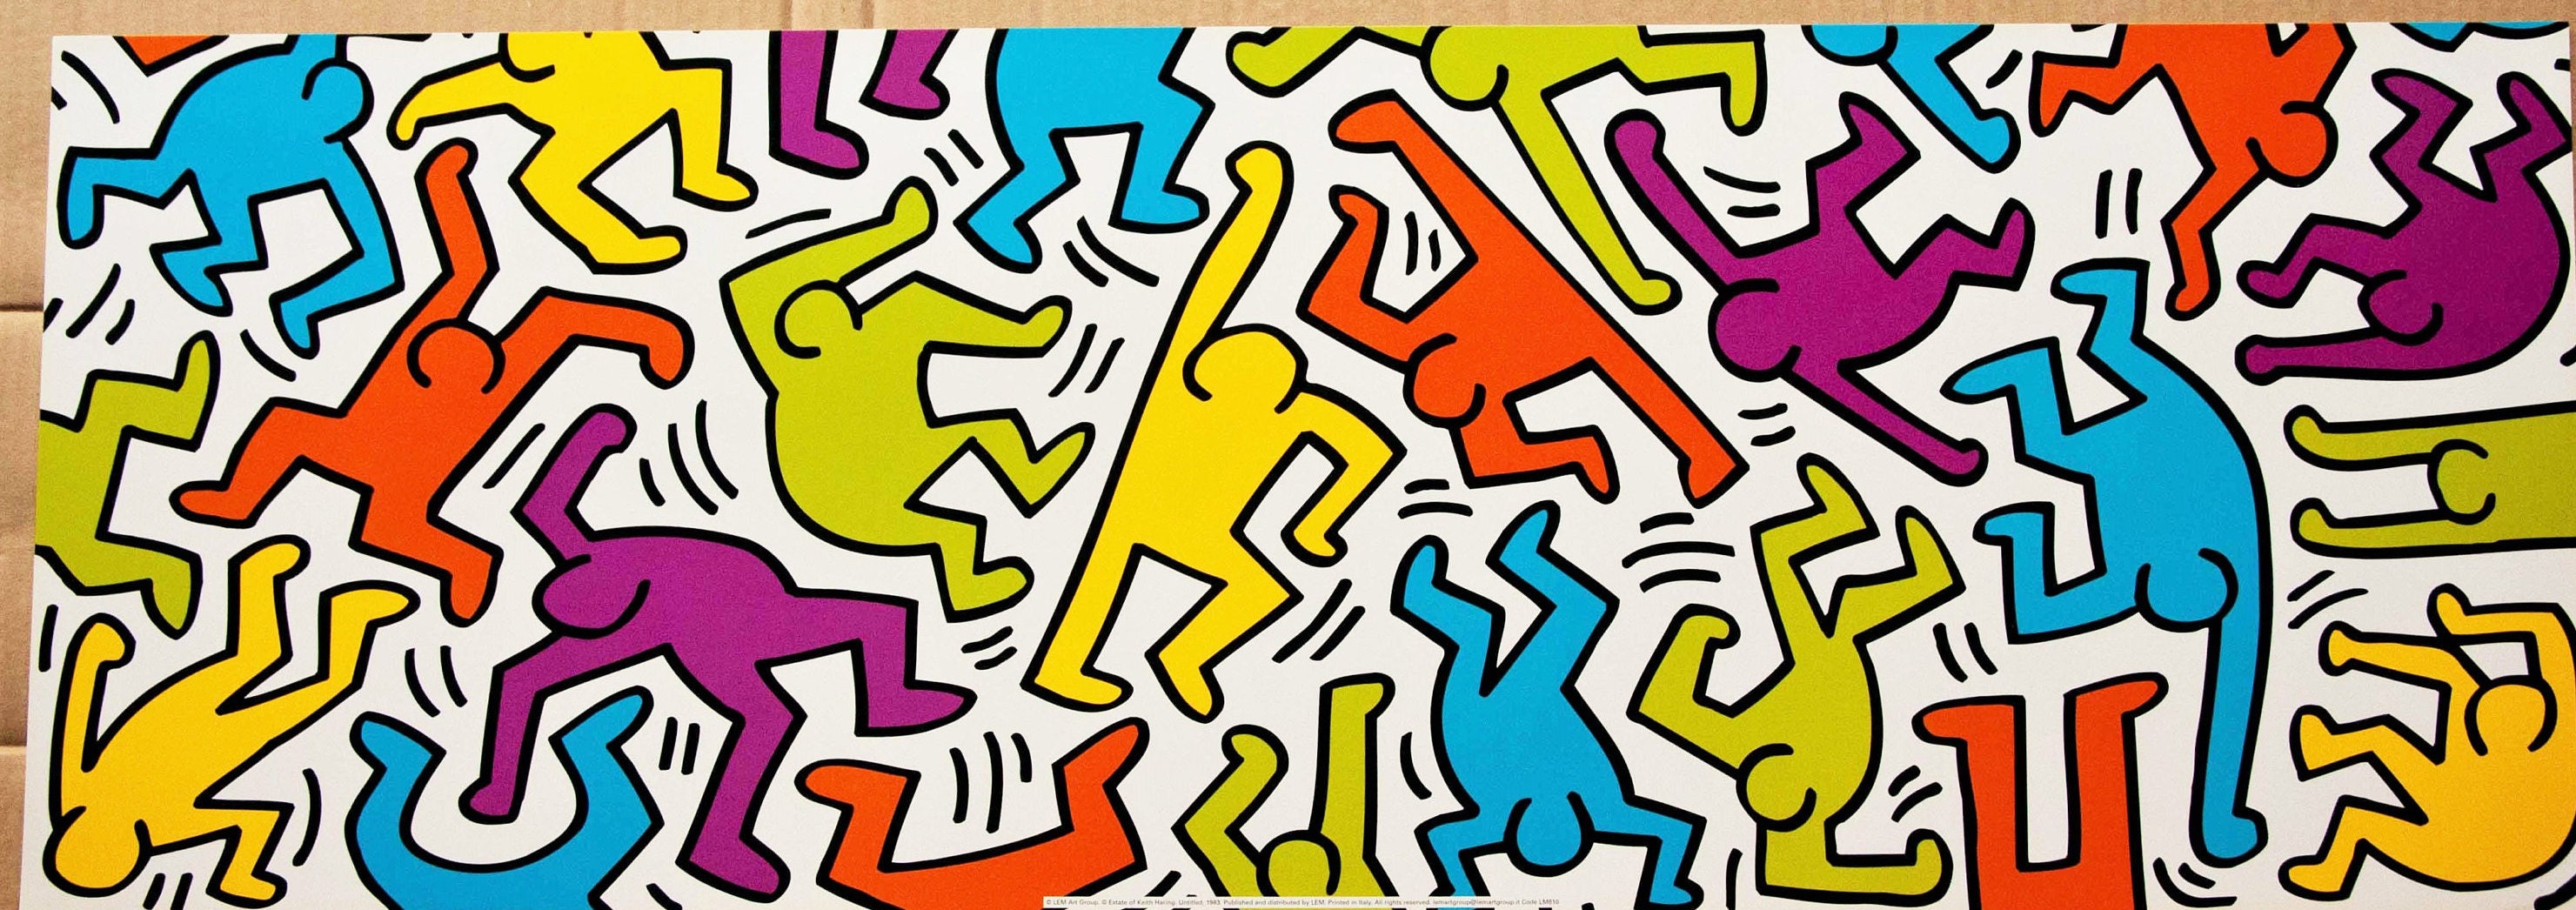 Keith Haring - Rare vintage poster - 1990s